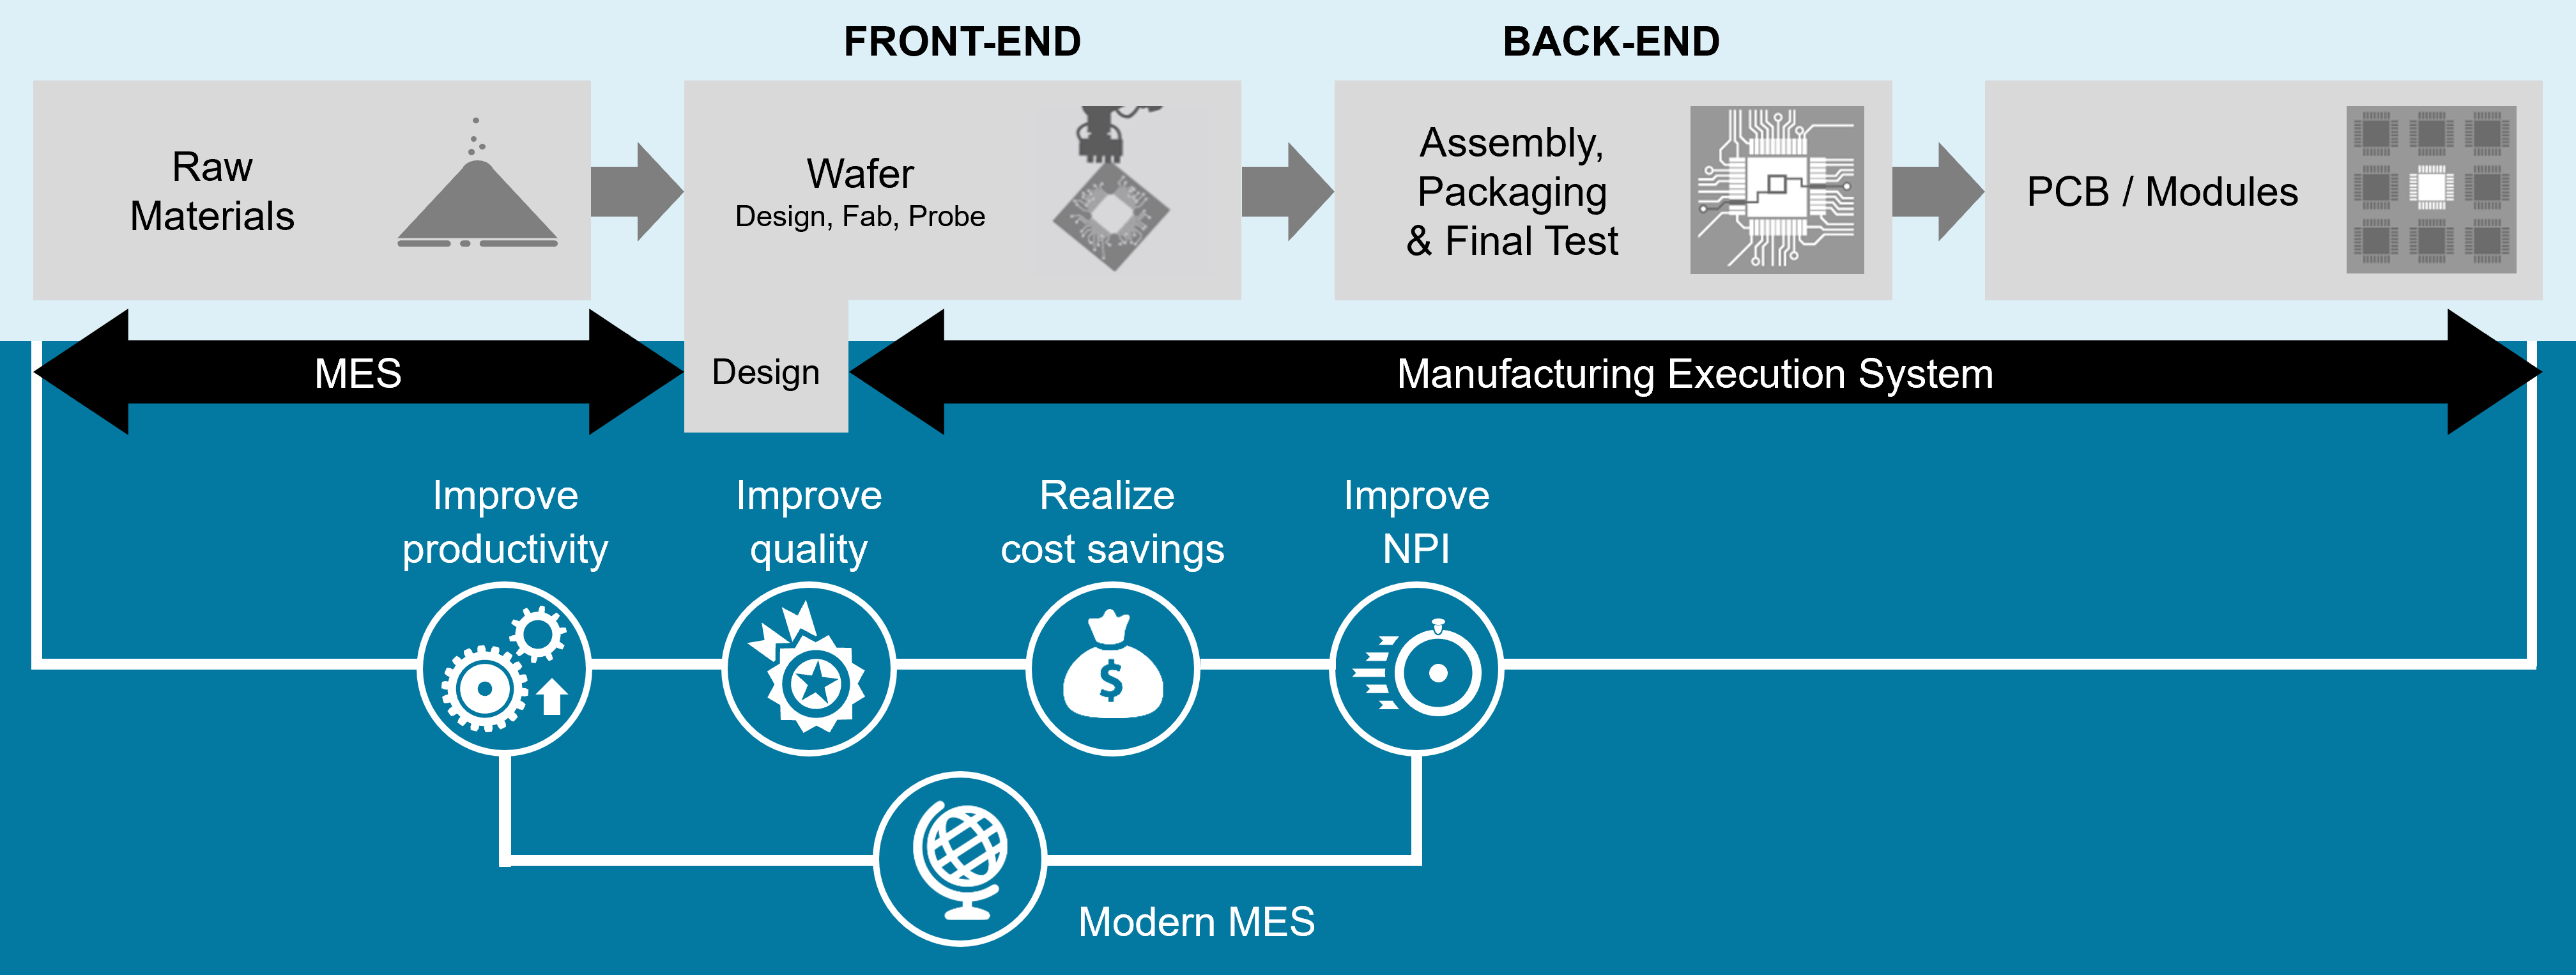 Modern MES masters new requirements in the front-end and back-end manufacturing process